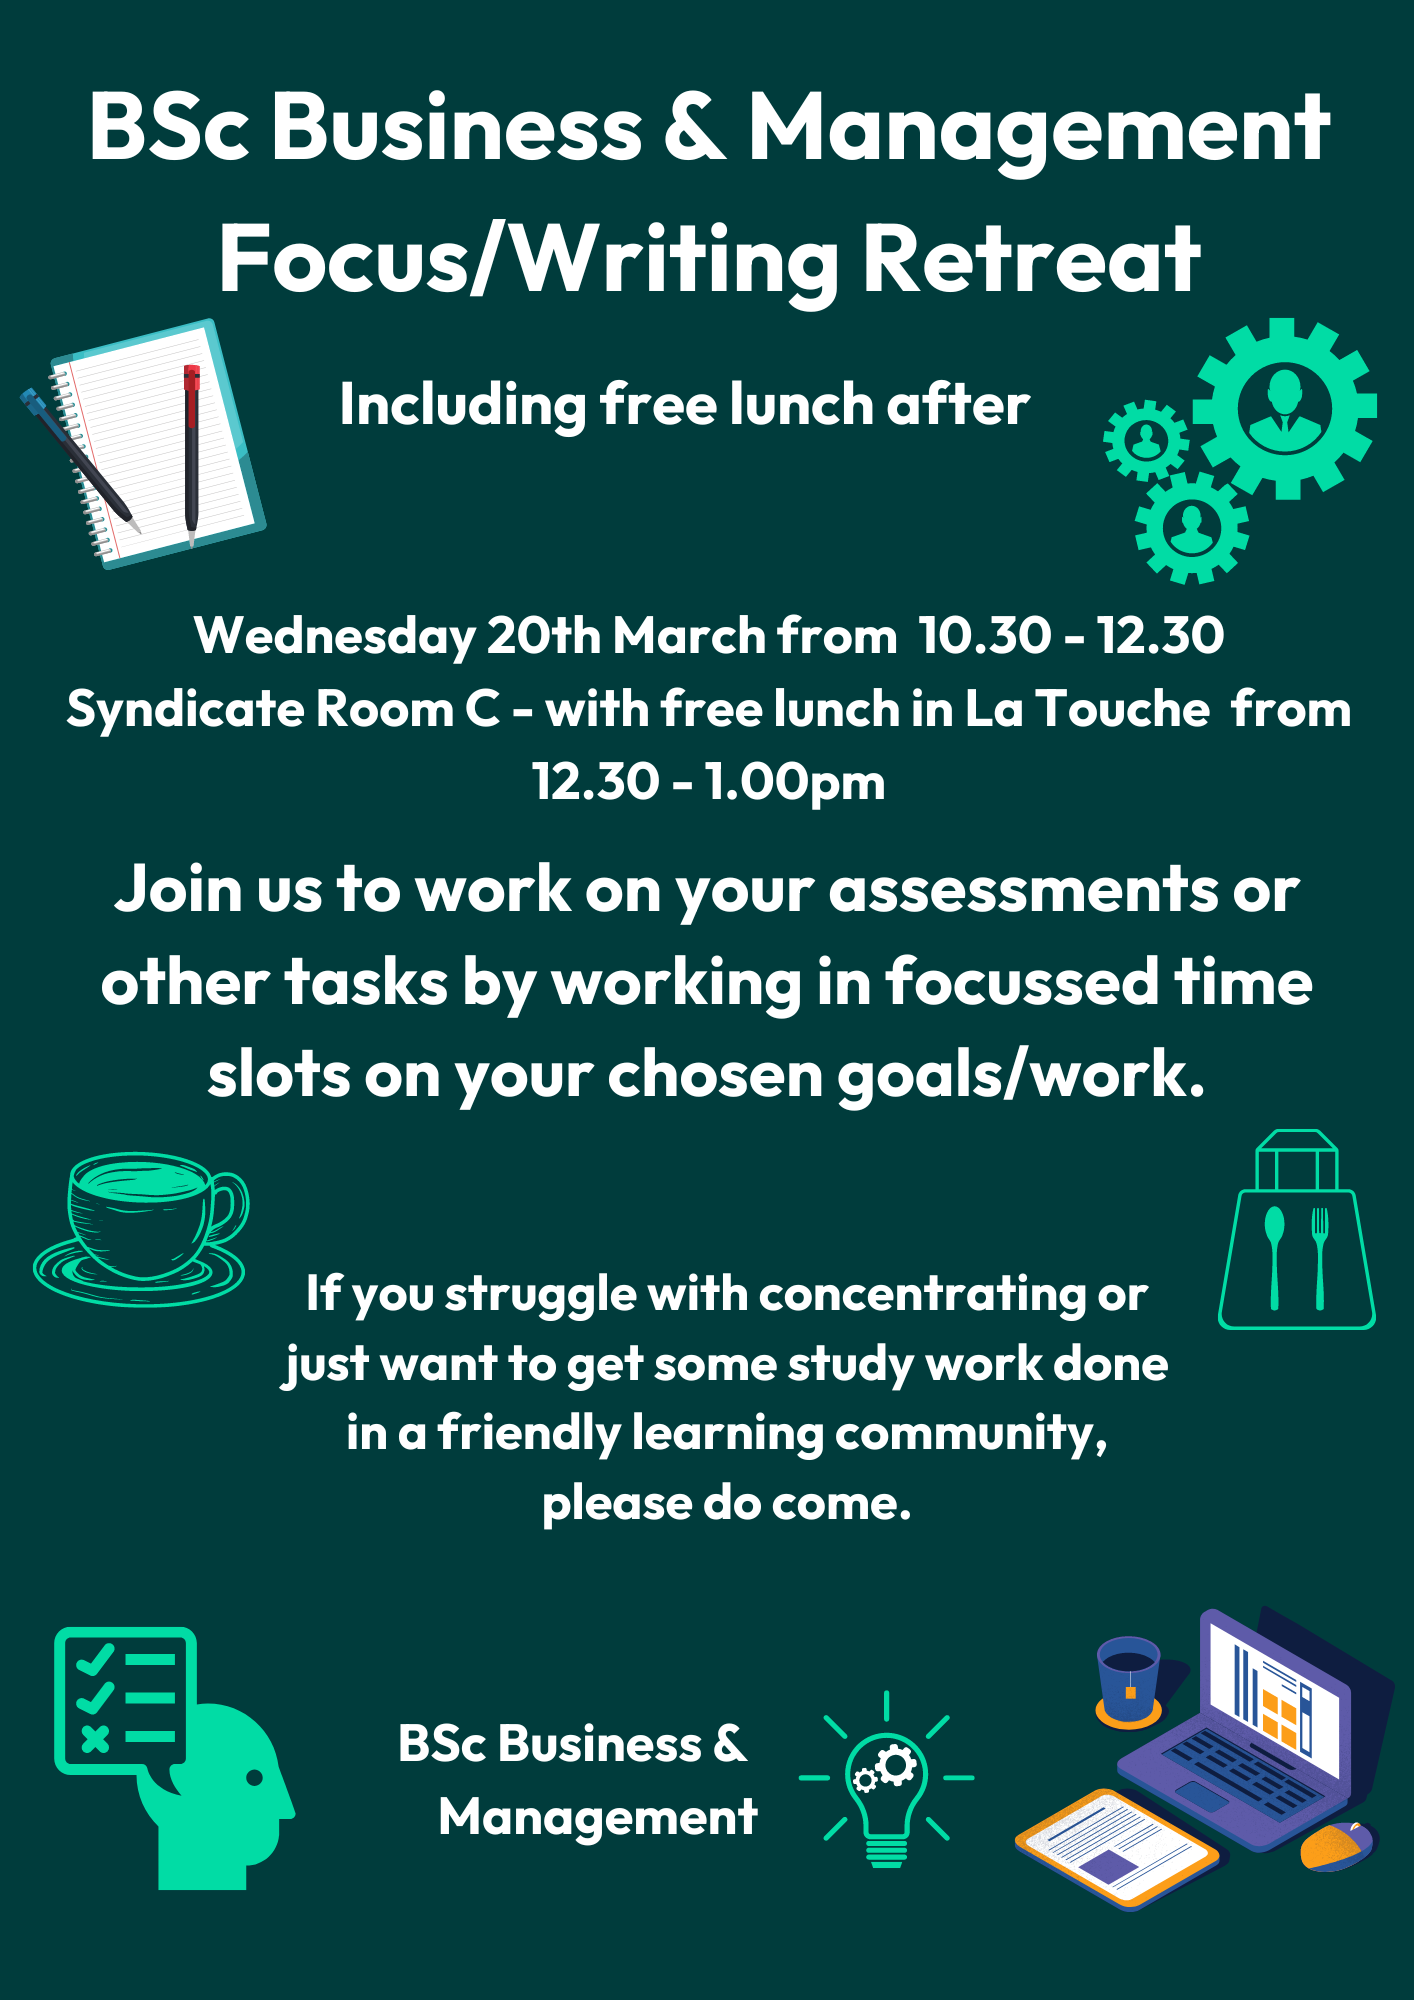 BSc Business and Management Focus/writing retreat

Including Free Lunch after

Join us to work on your assessments or other tasks in focussed time slots on your chosen goals/work

If you struggle with concentrating or just want to get some study work work done in a friendly learning community, please do come